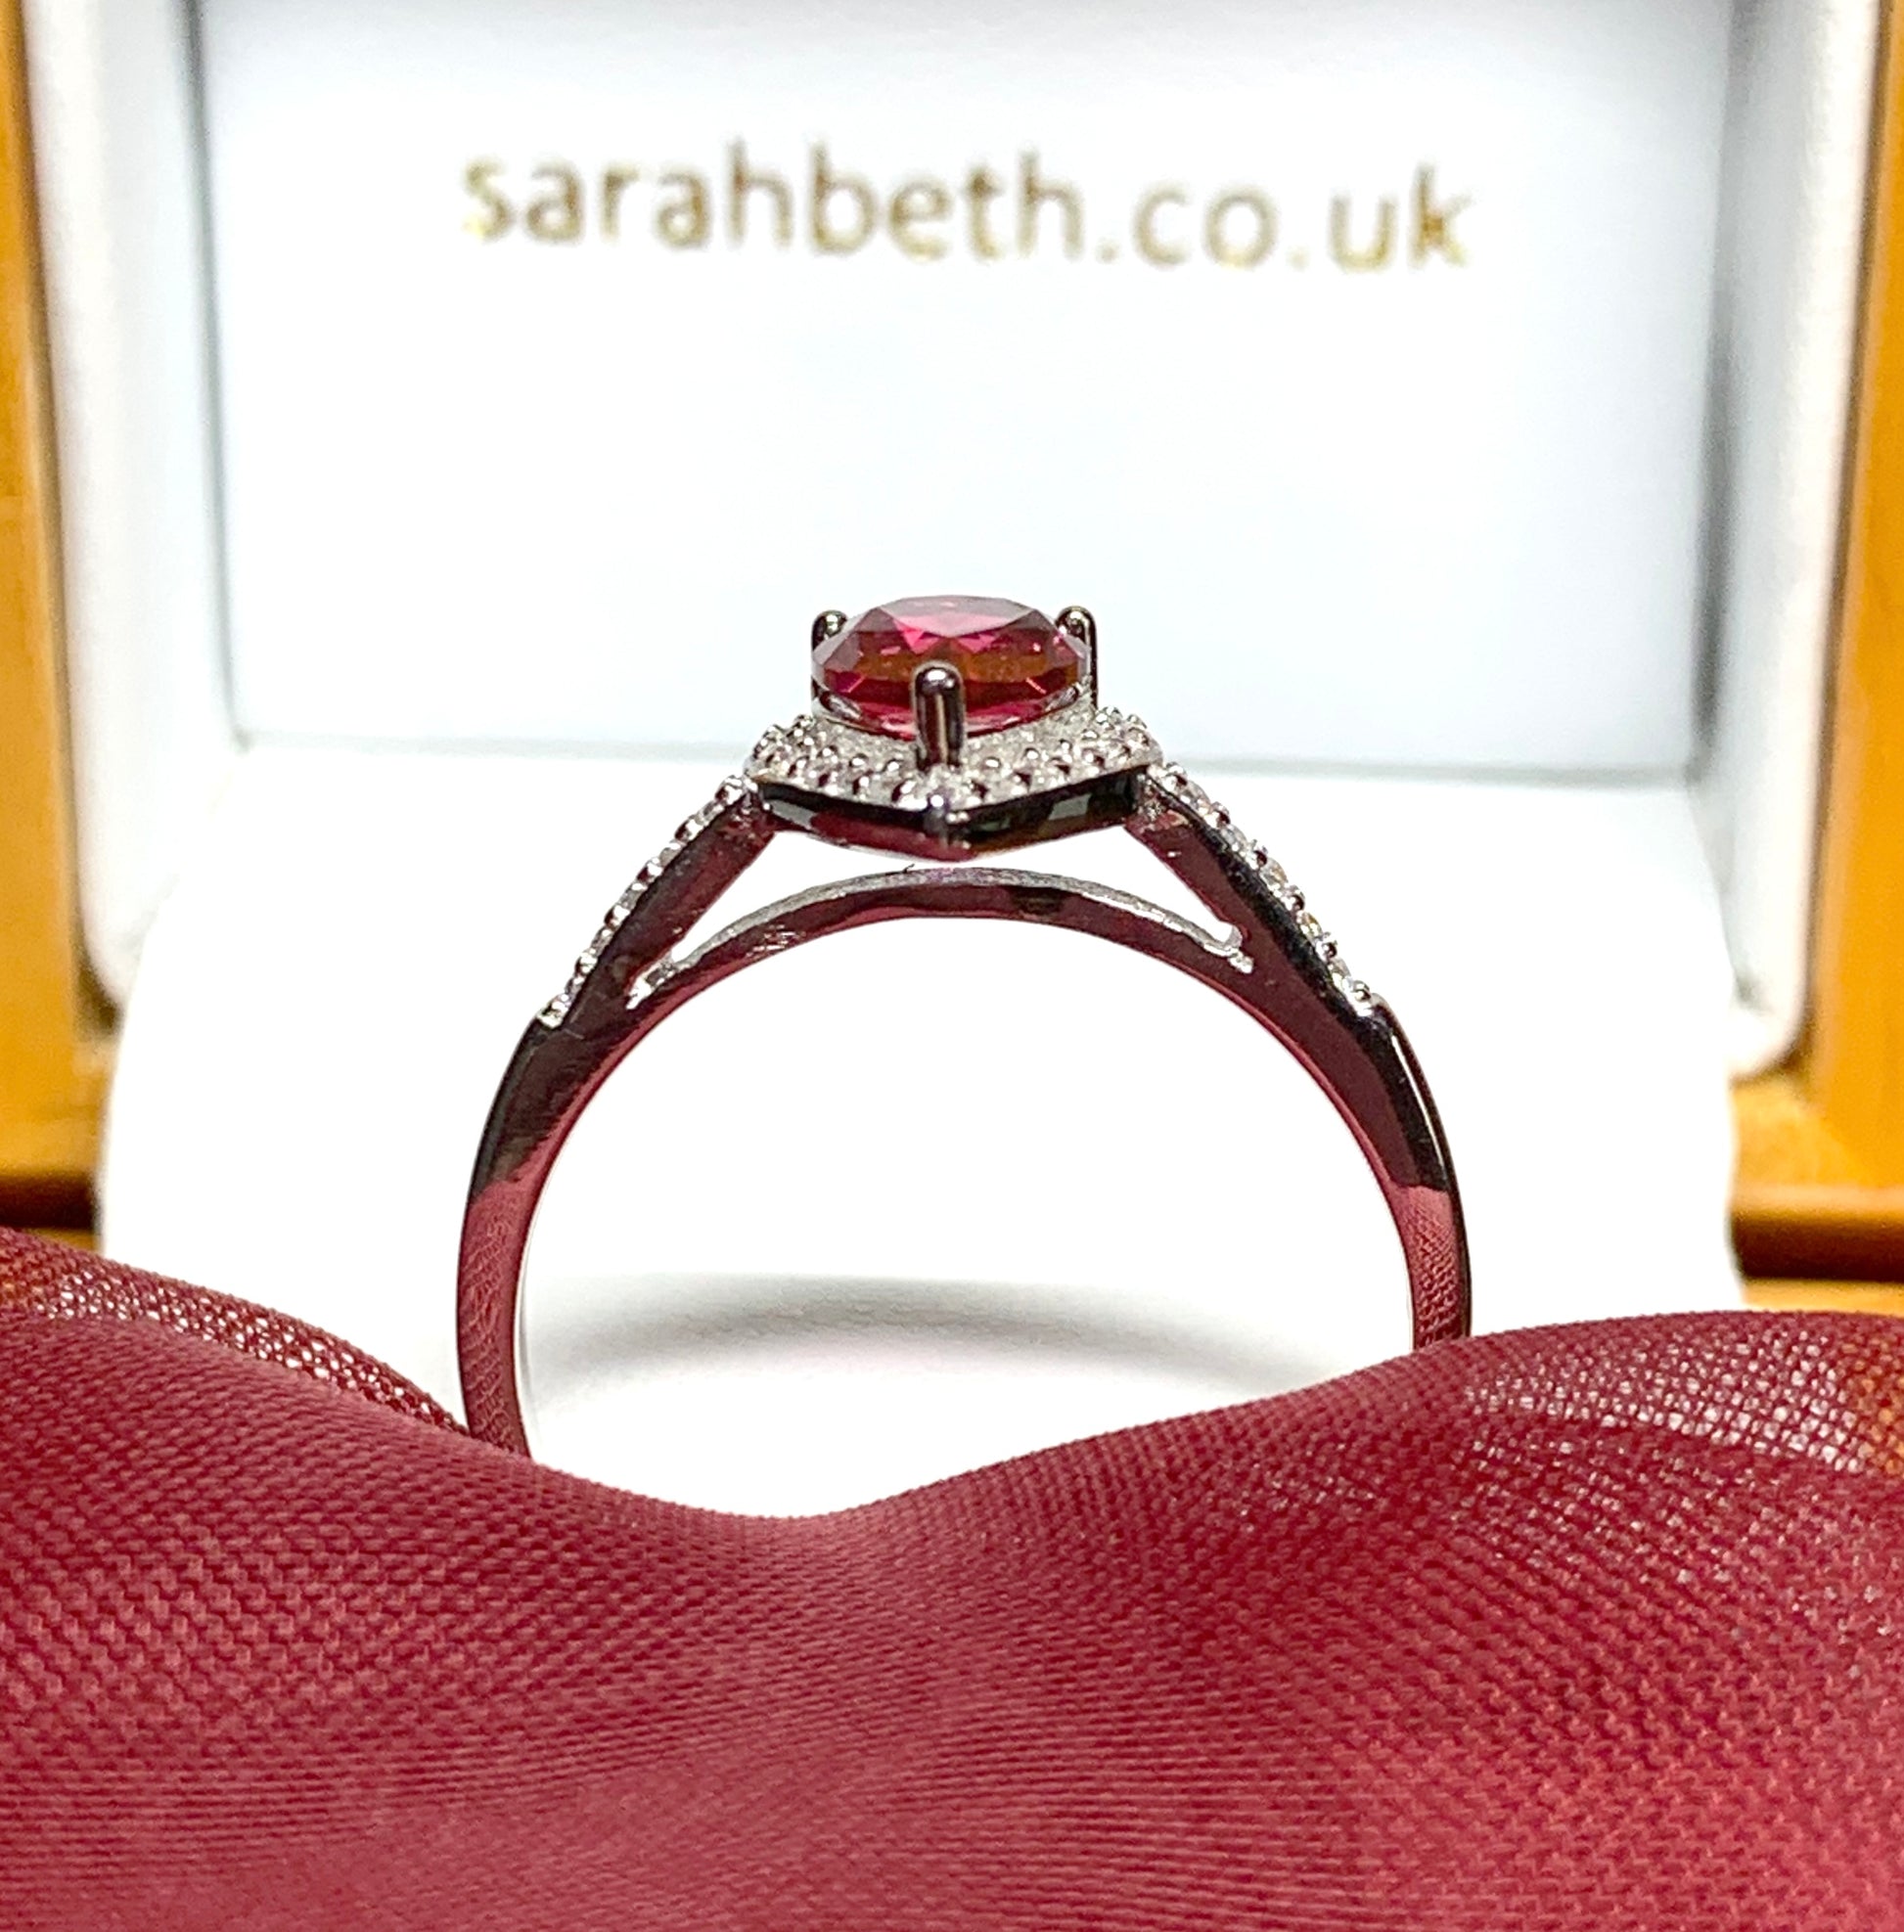 Large bright red and white cubic zirconia pear shaped cluster dress cocktail ring